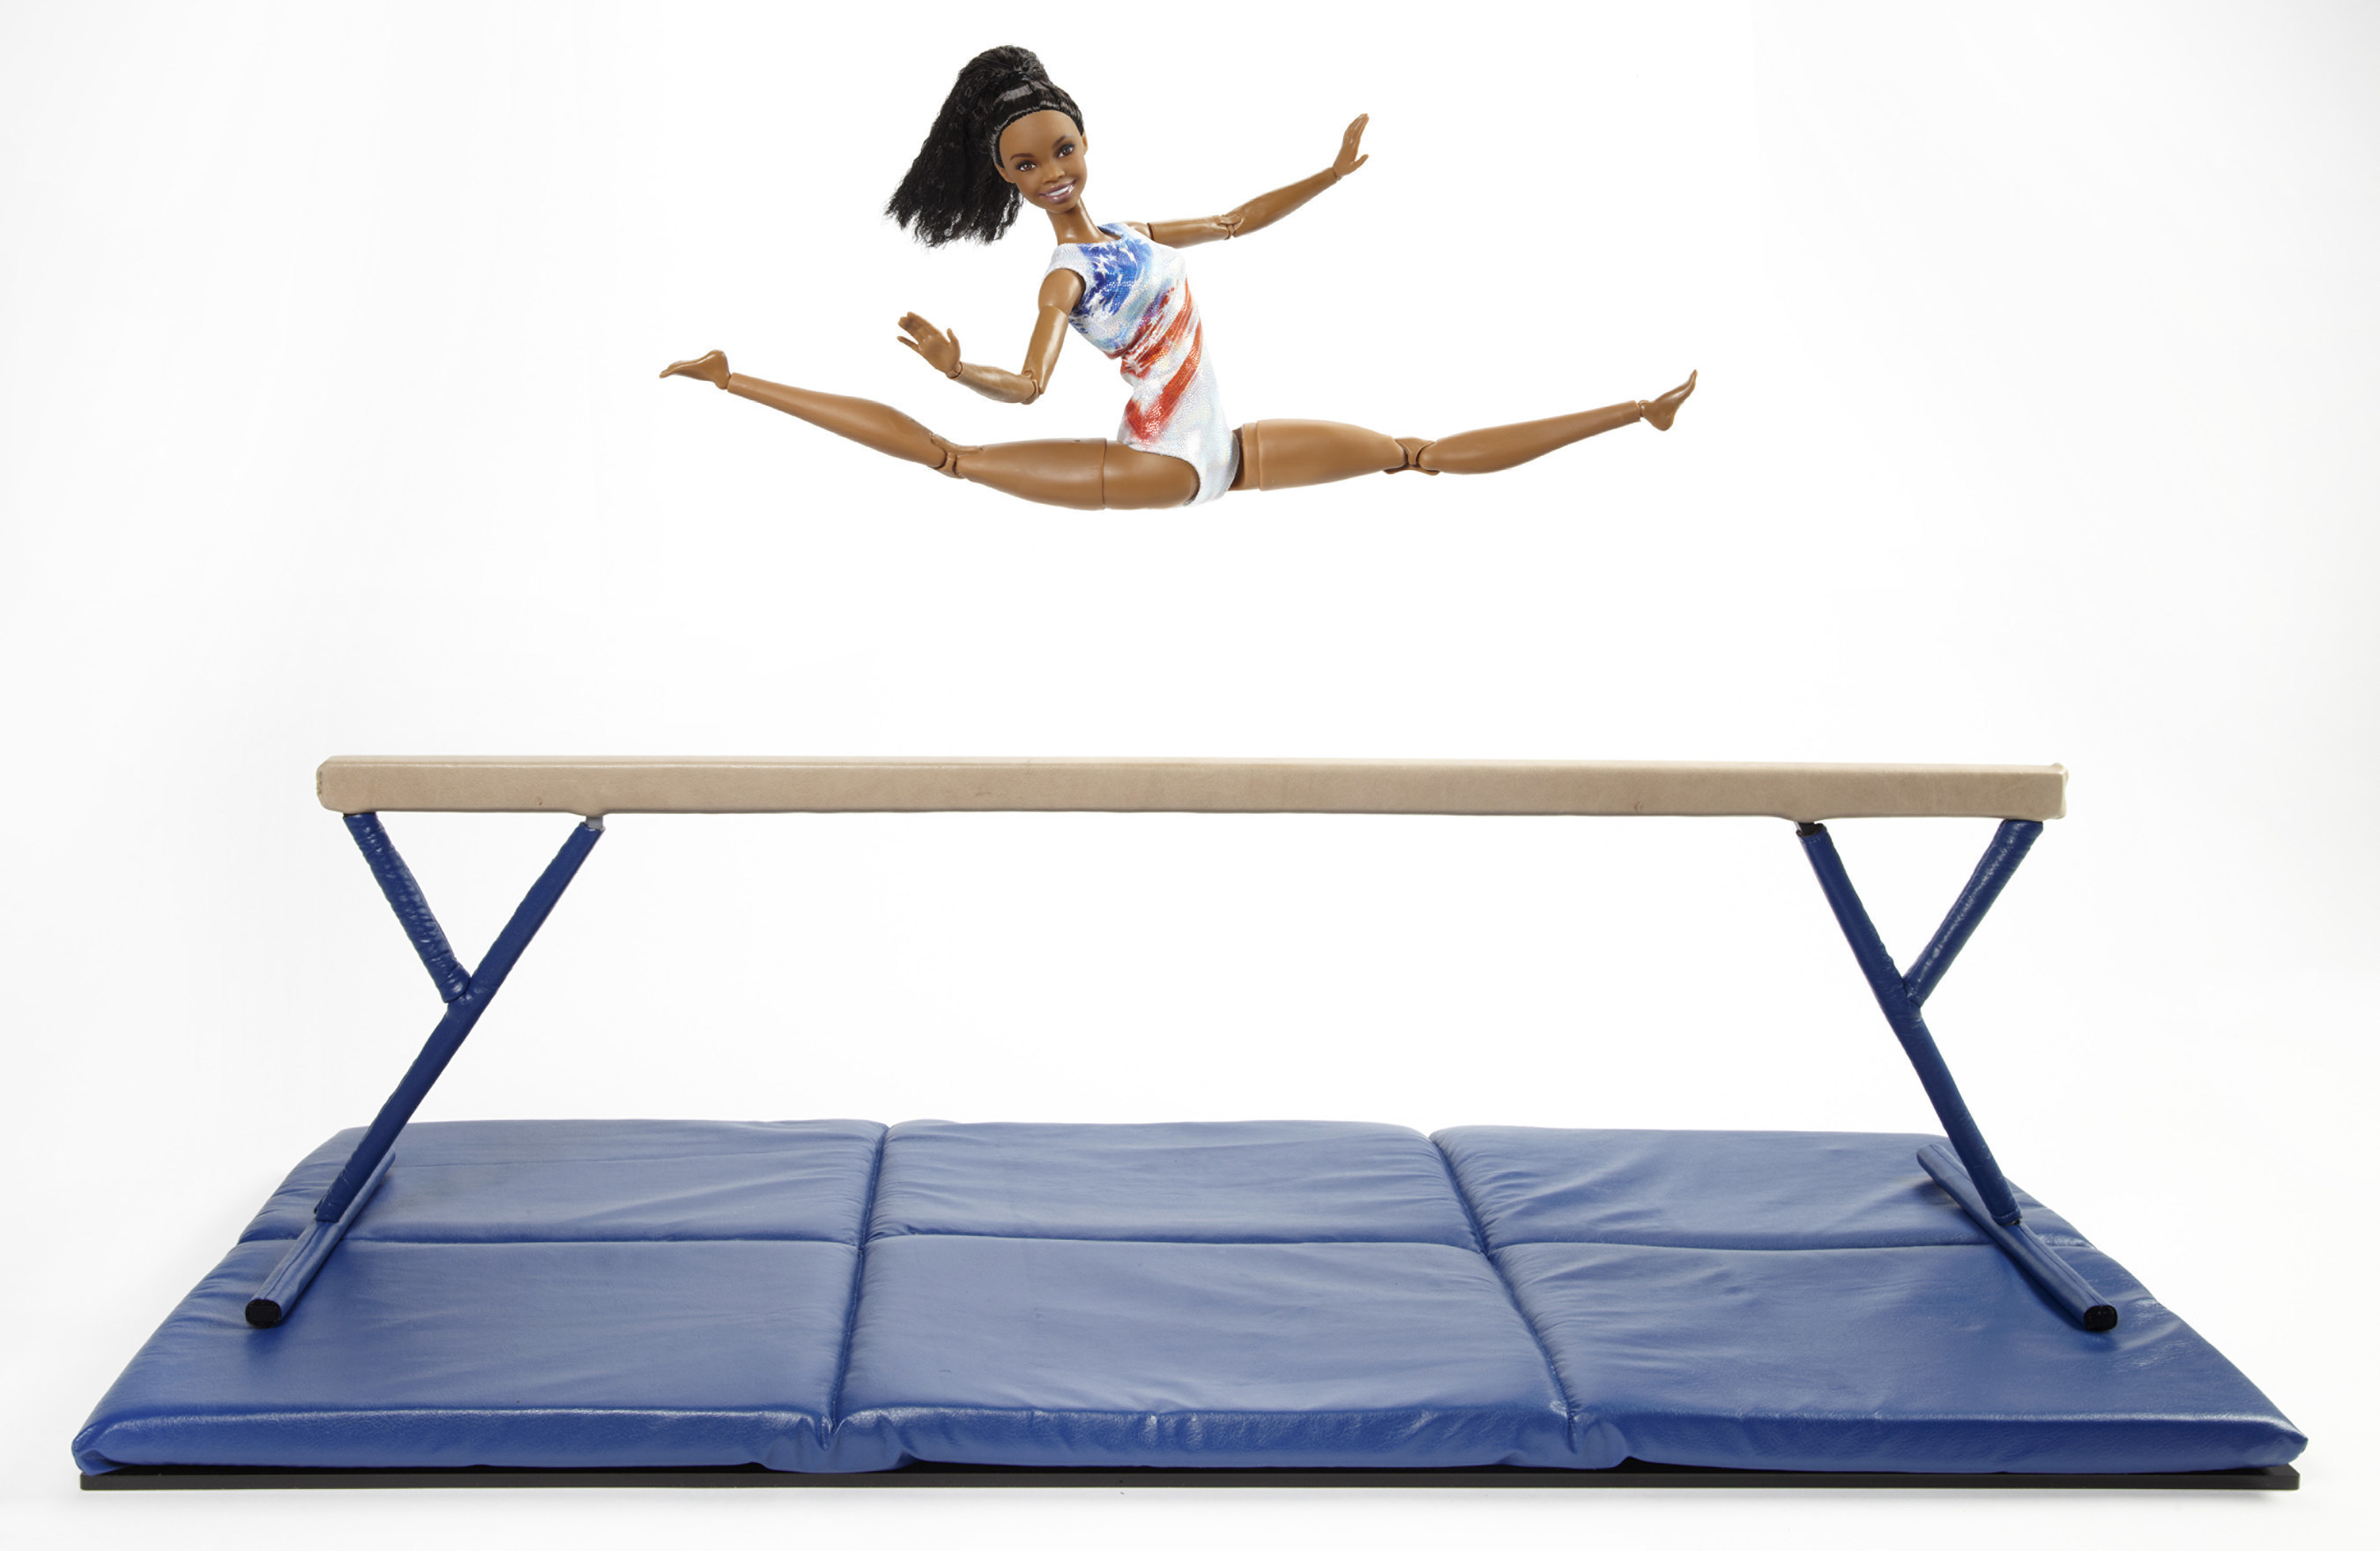 Barbie honors Gabby Douglas, 2016 U.S. Olympic Gymnastics team member and two time 2012 Olympic gold medalist, with a one-of-a-kind Barbie doll in her likeness for inspiring girls. Douglas is honored as the most recent Barbie "Shero," a female hero inspiring the next generation of girls that they can be anything.